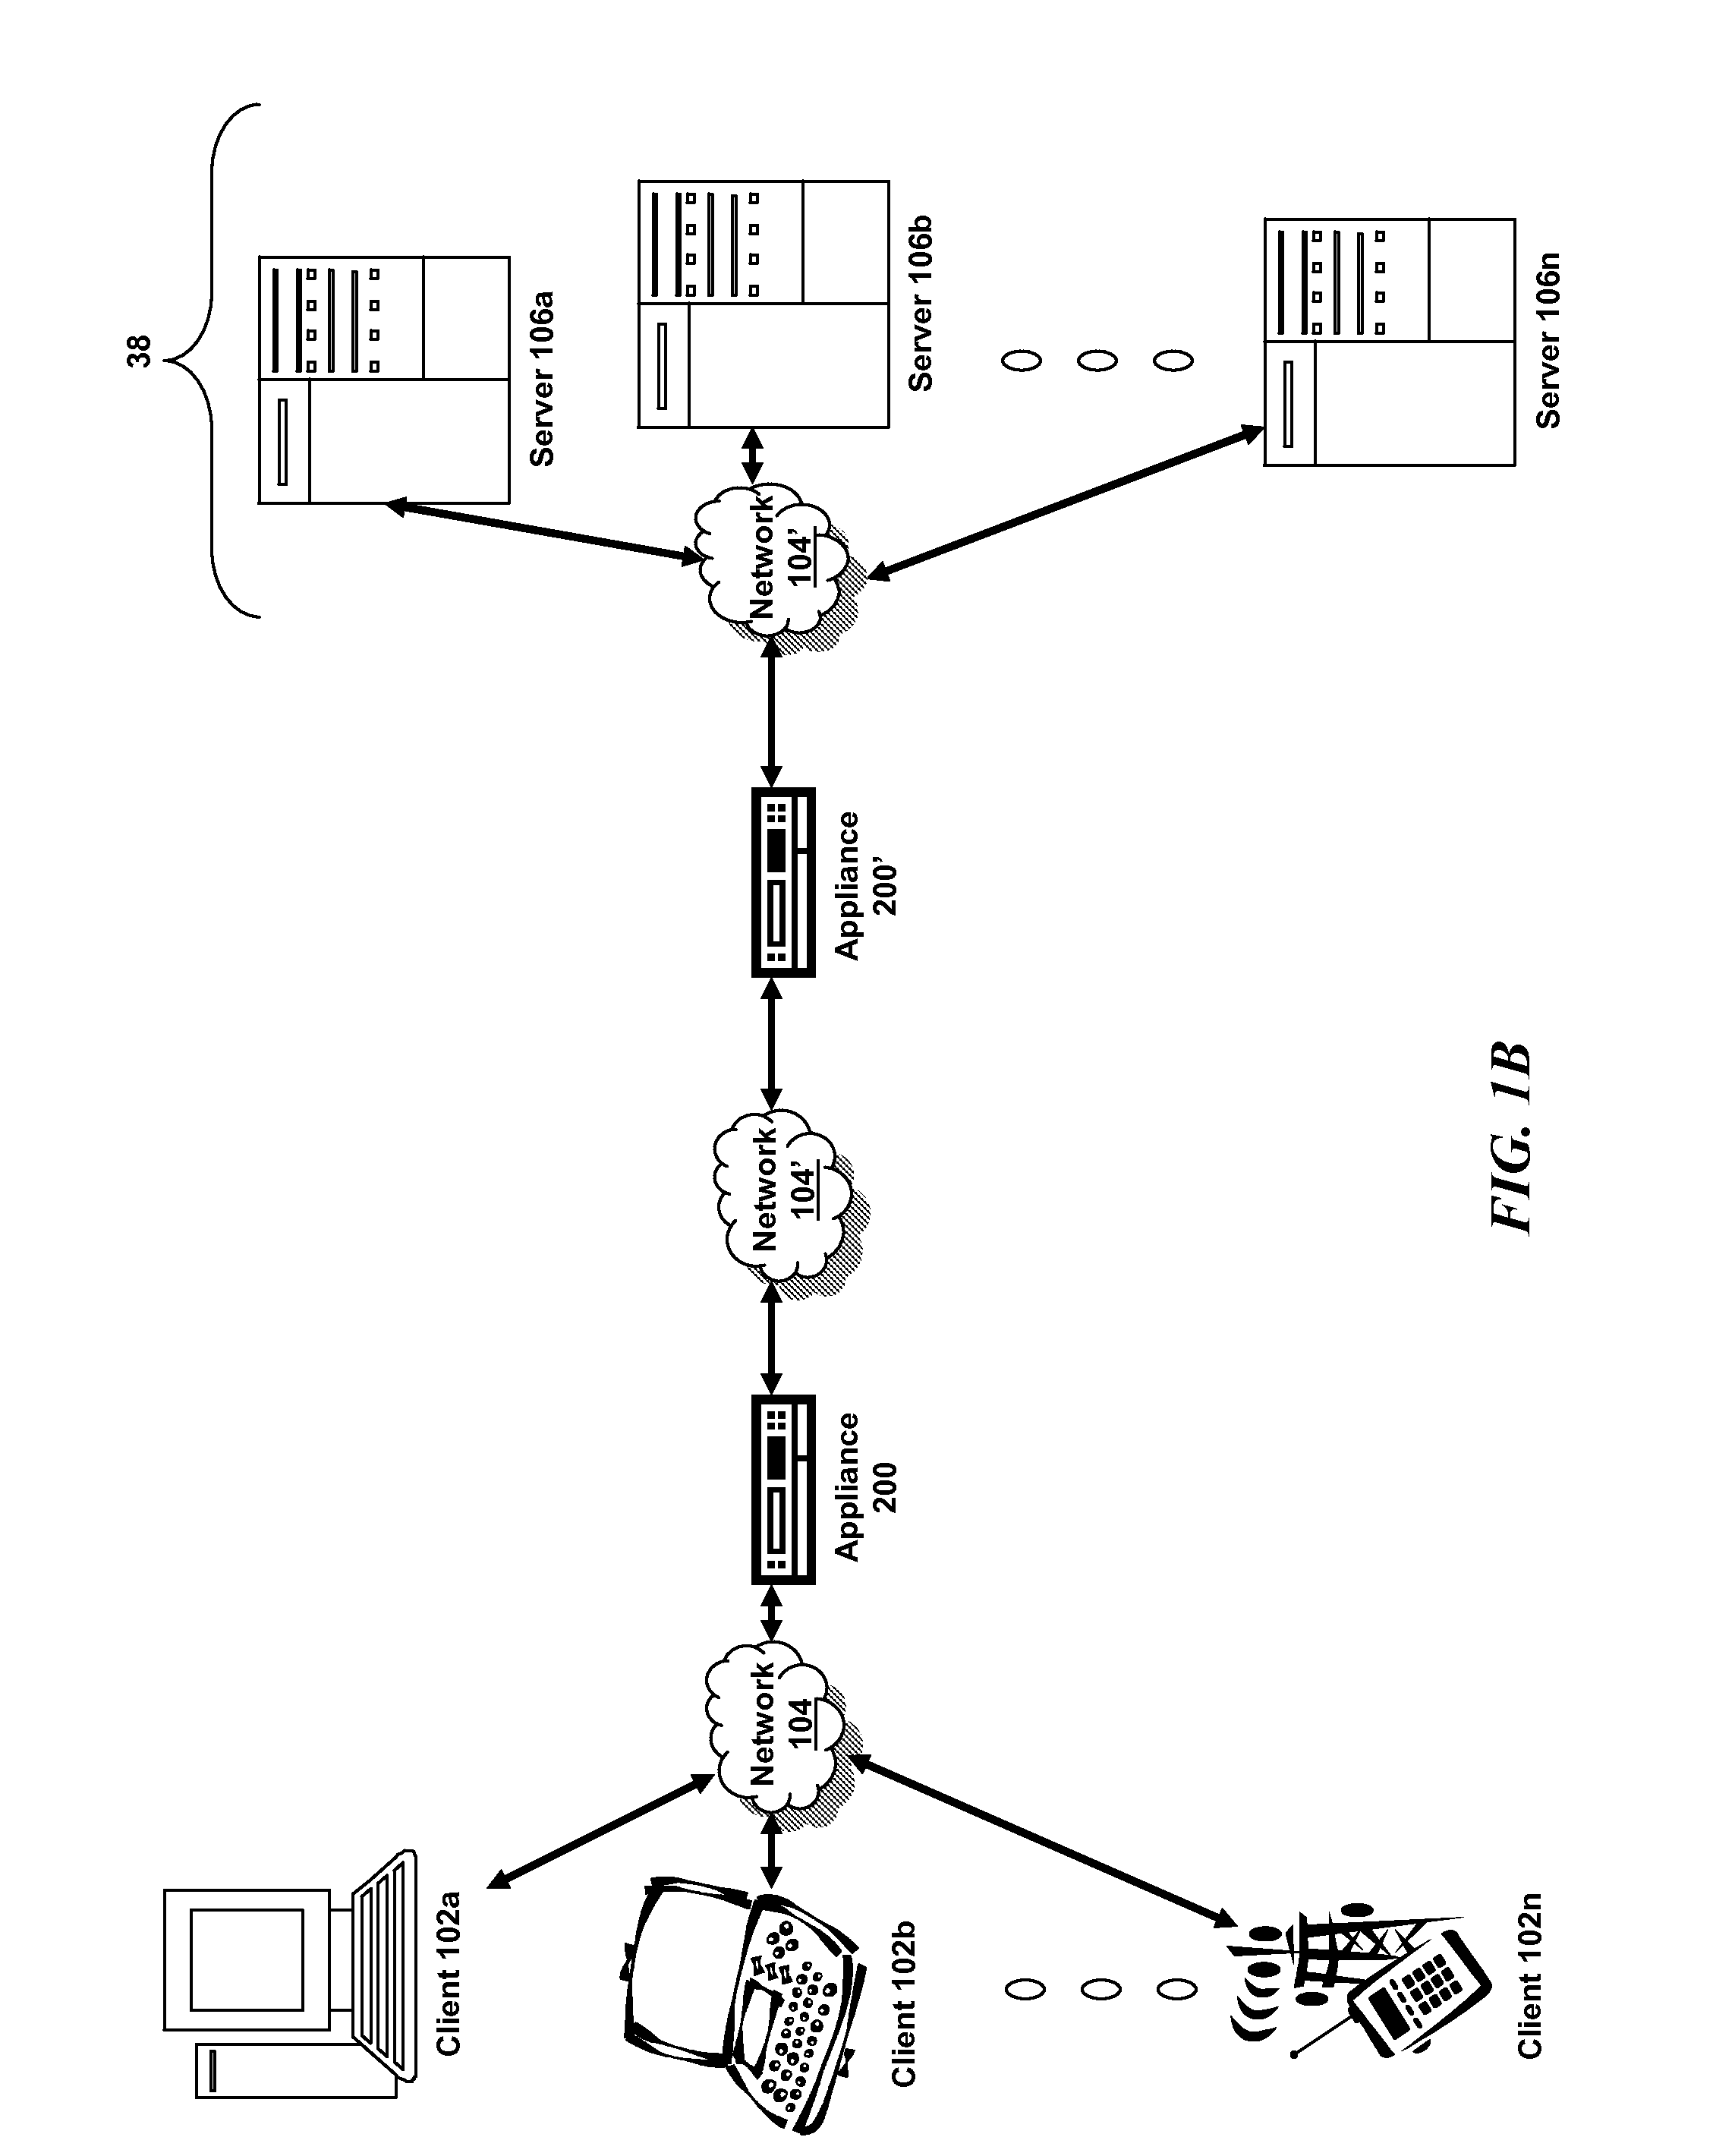 Systems and Methods for Database Proxy Request Switching